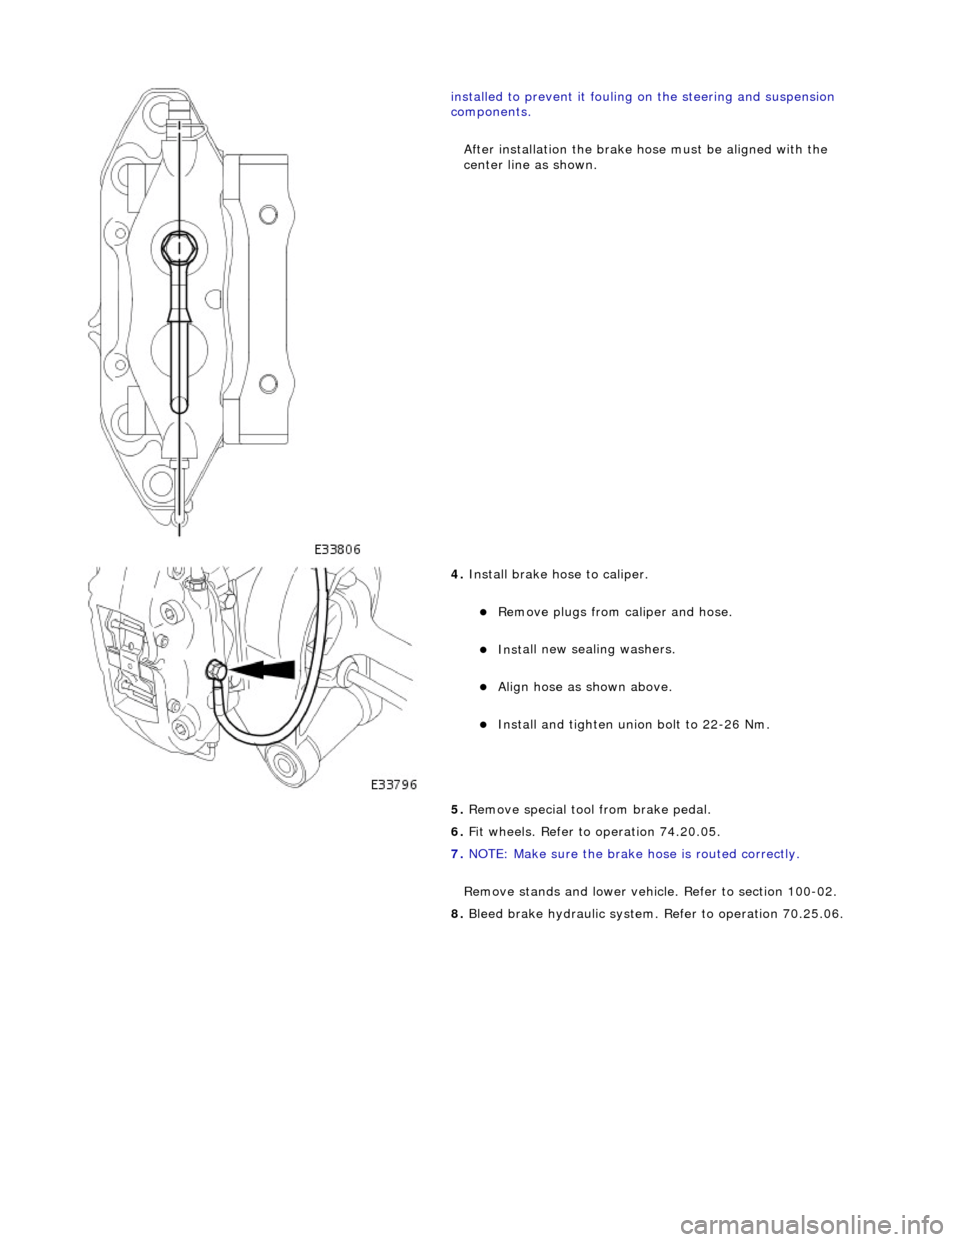 JAGUAR X308 1998 2.G Service Manual  
  
i
 nstalled to prevent it fouling on the steering and suspension 
components. 
After installation the brake ho se must be aligned with the 
center line as shown. 
 
4.  Install brake hose to 
 ca